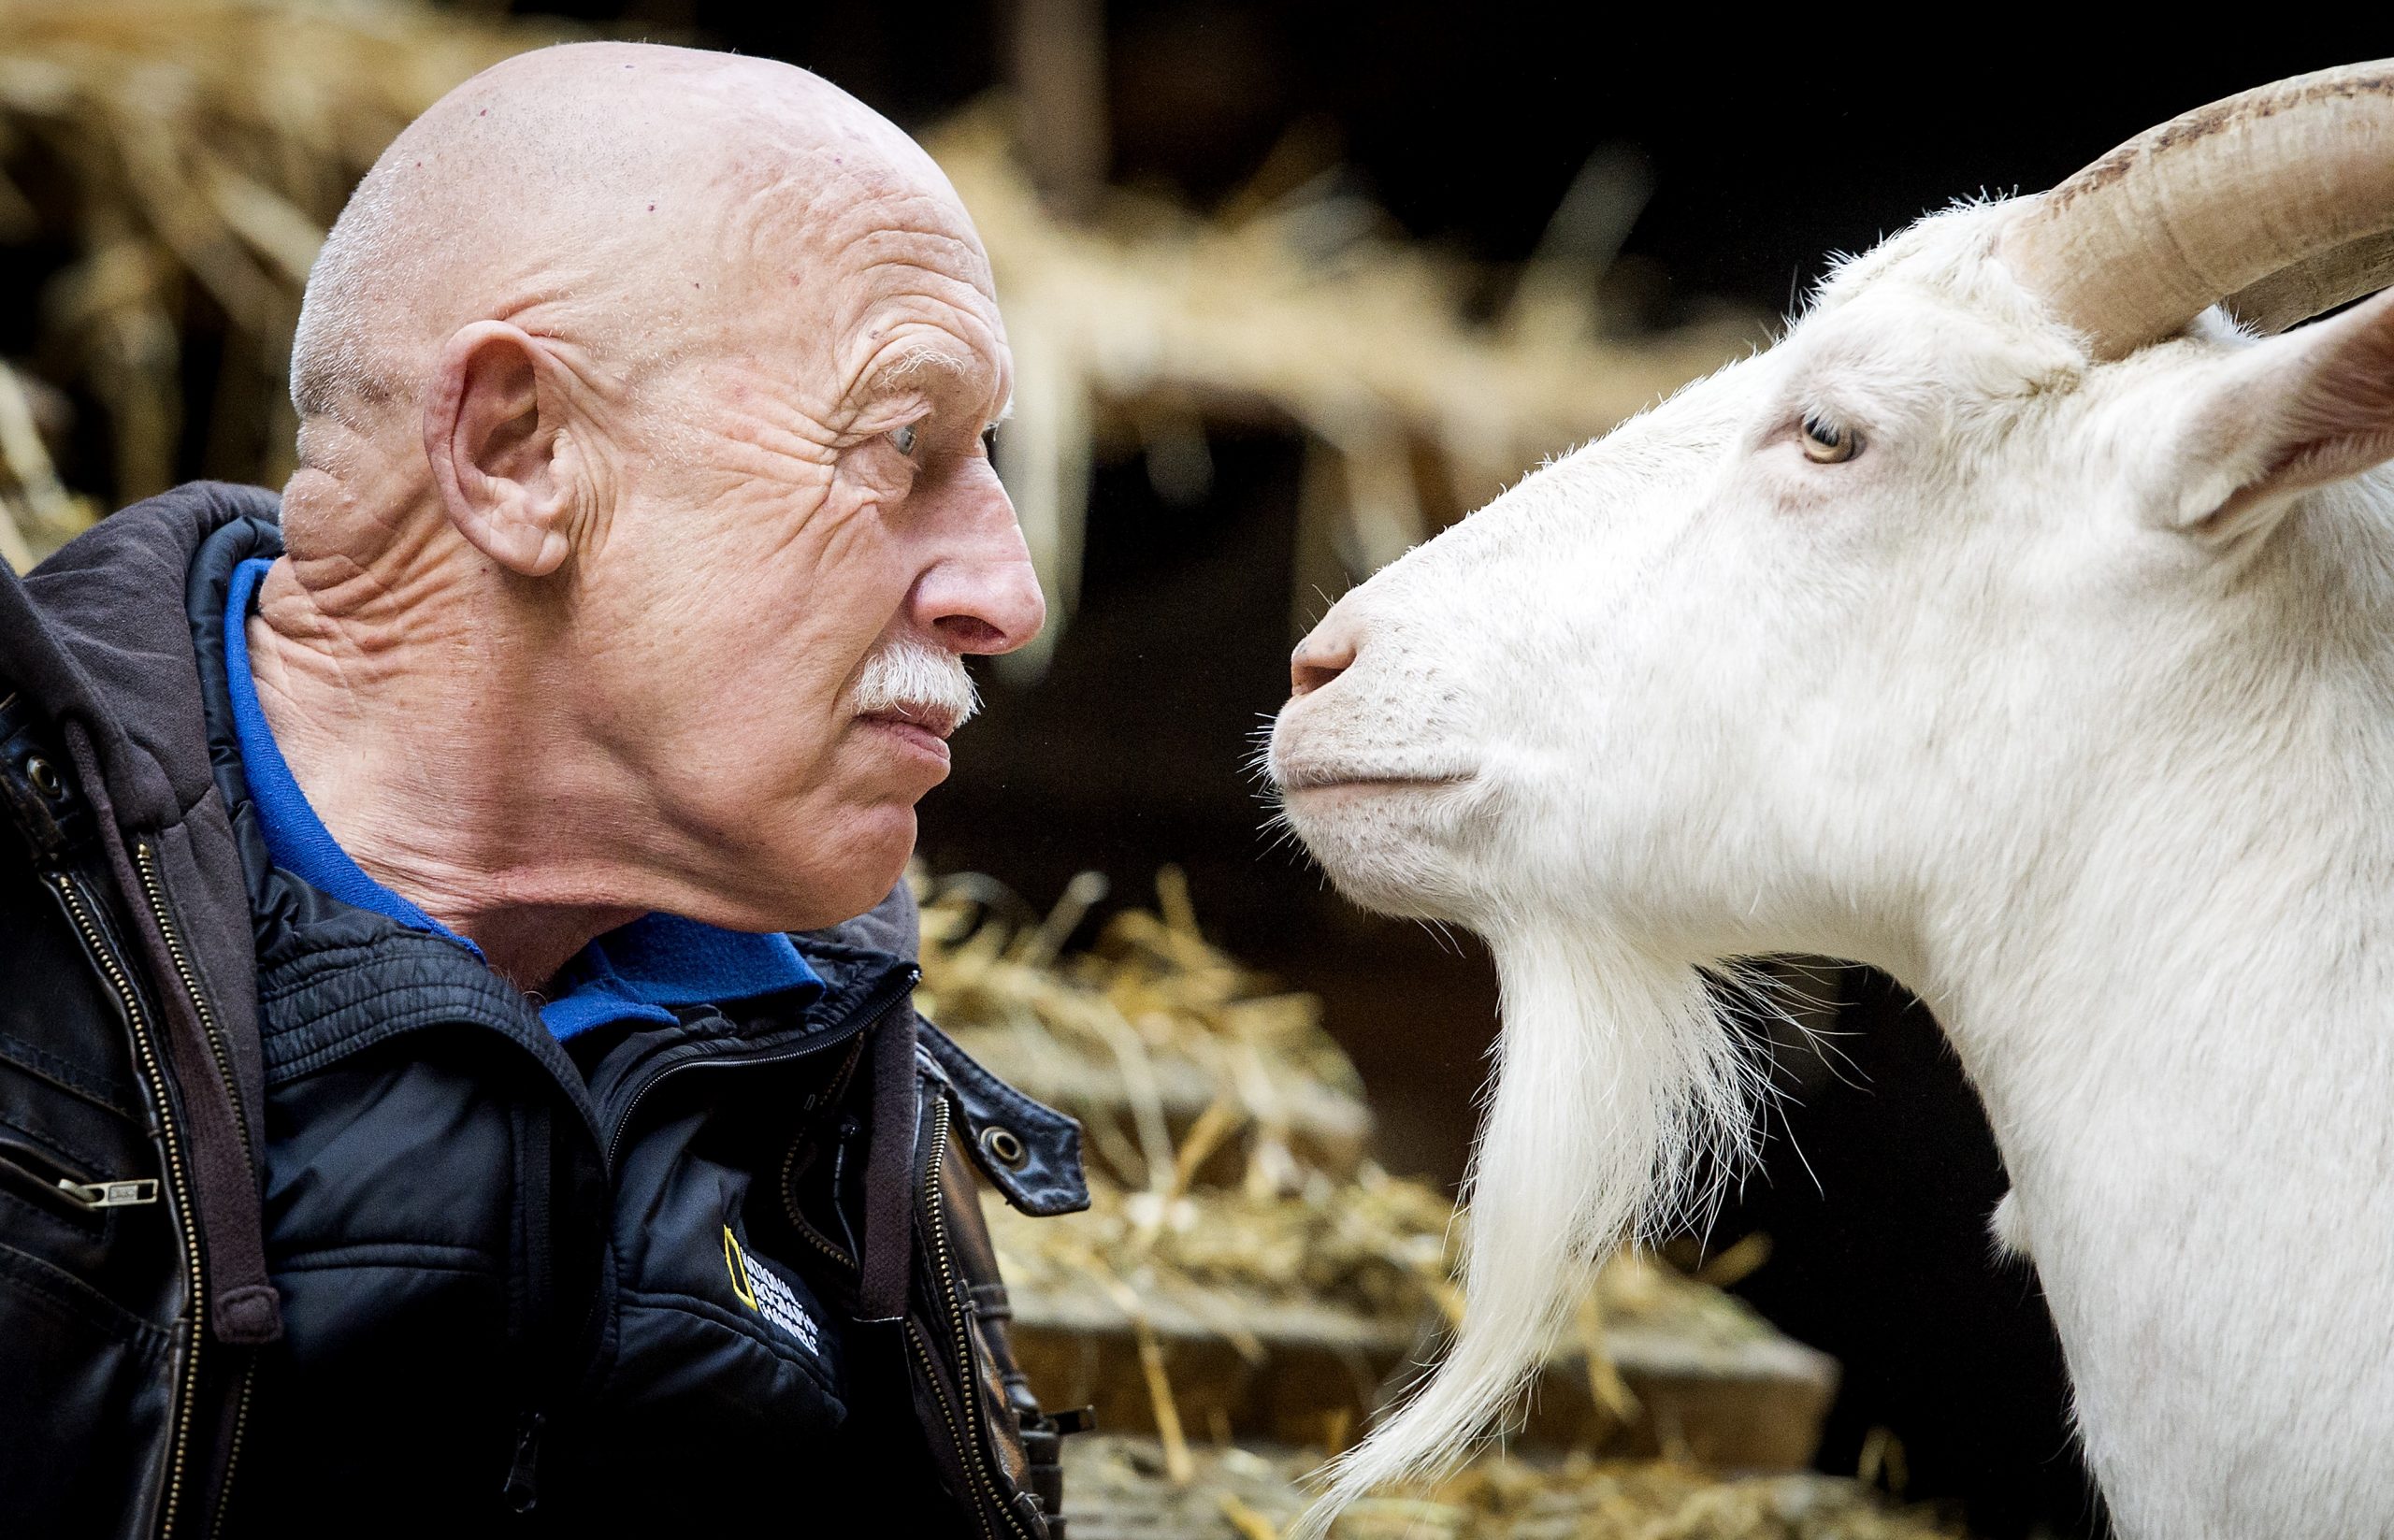 Veterinarian Dr. Jan Pol of 'The Incredible Dr. Pol' is face-to-face with a goat in this photograph.